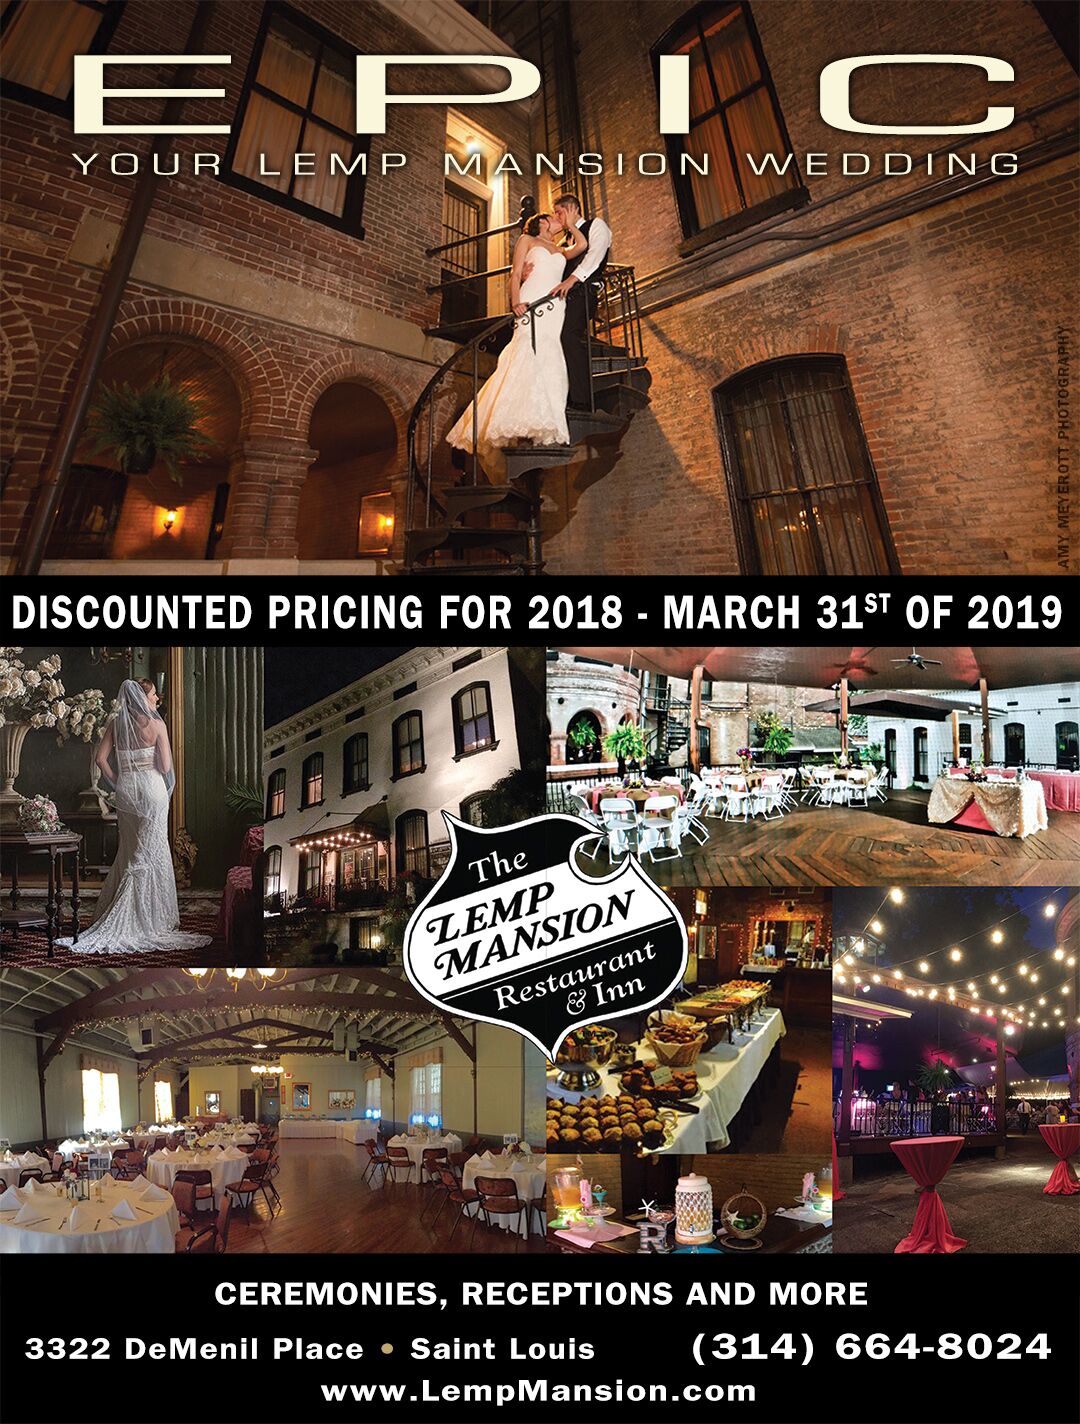 Lemp Mansion Restaurant | Rehearsal Dinners, Bridal Showers & Parties - St. Louis, MO